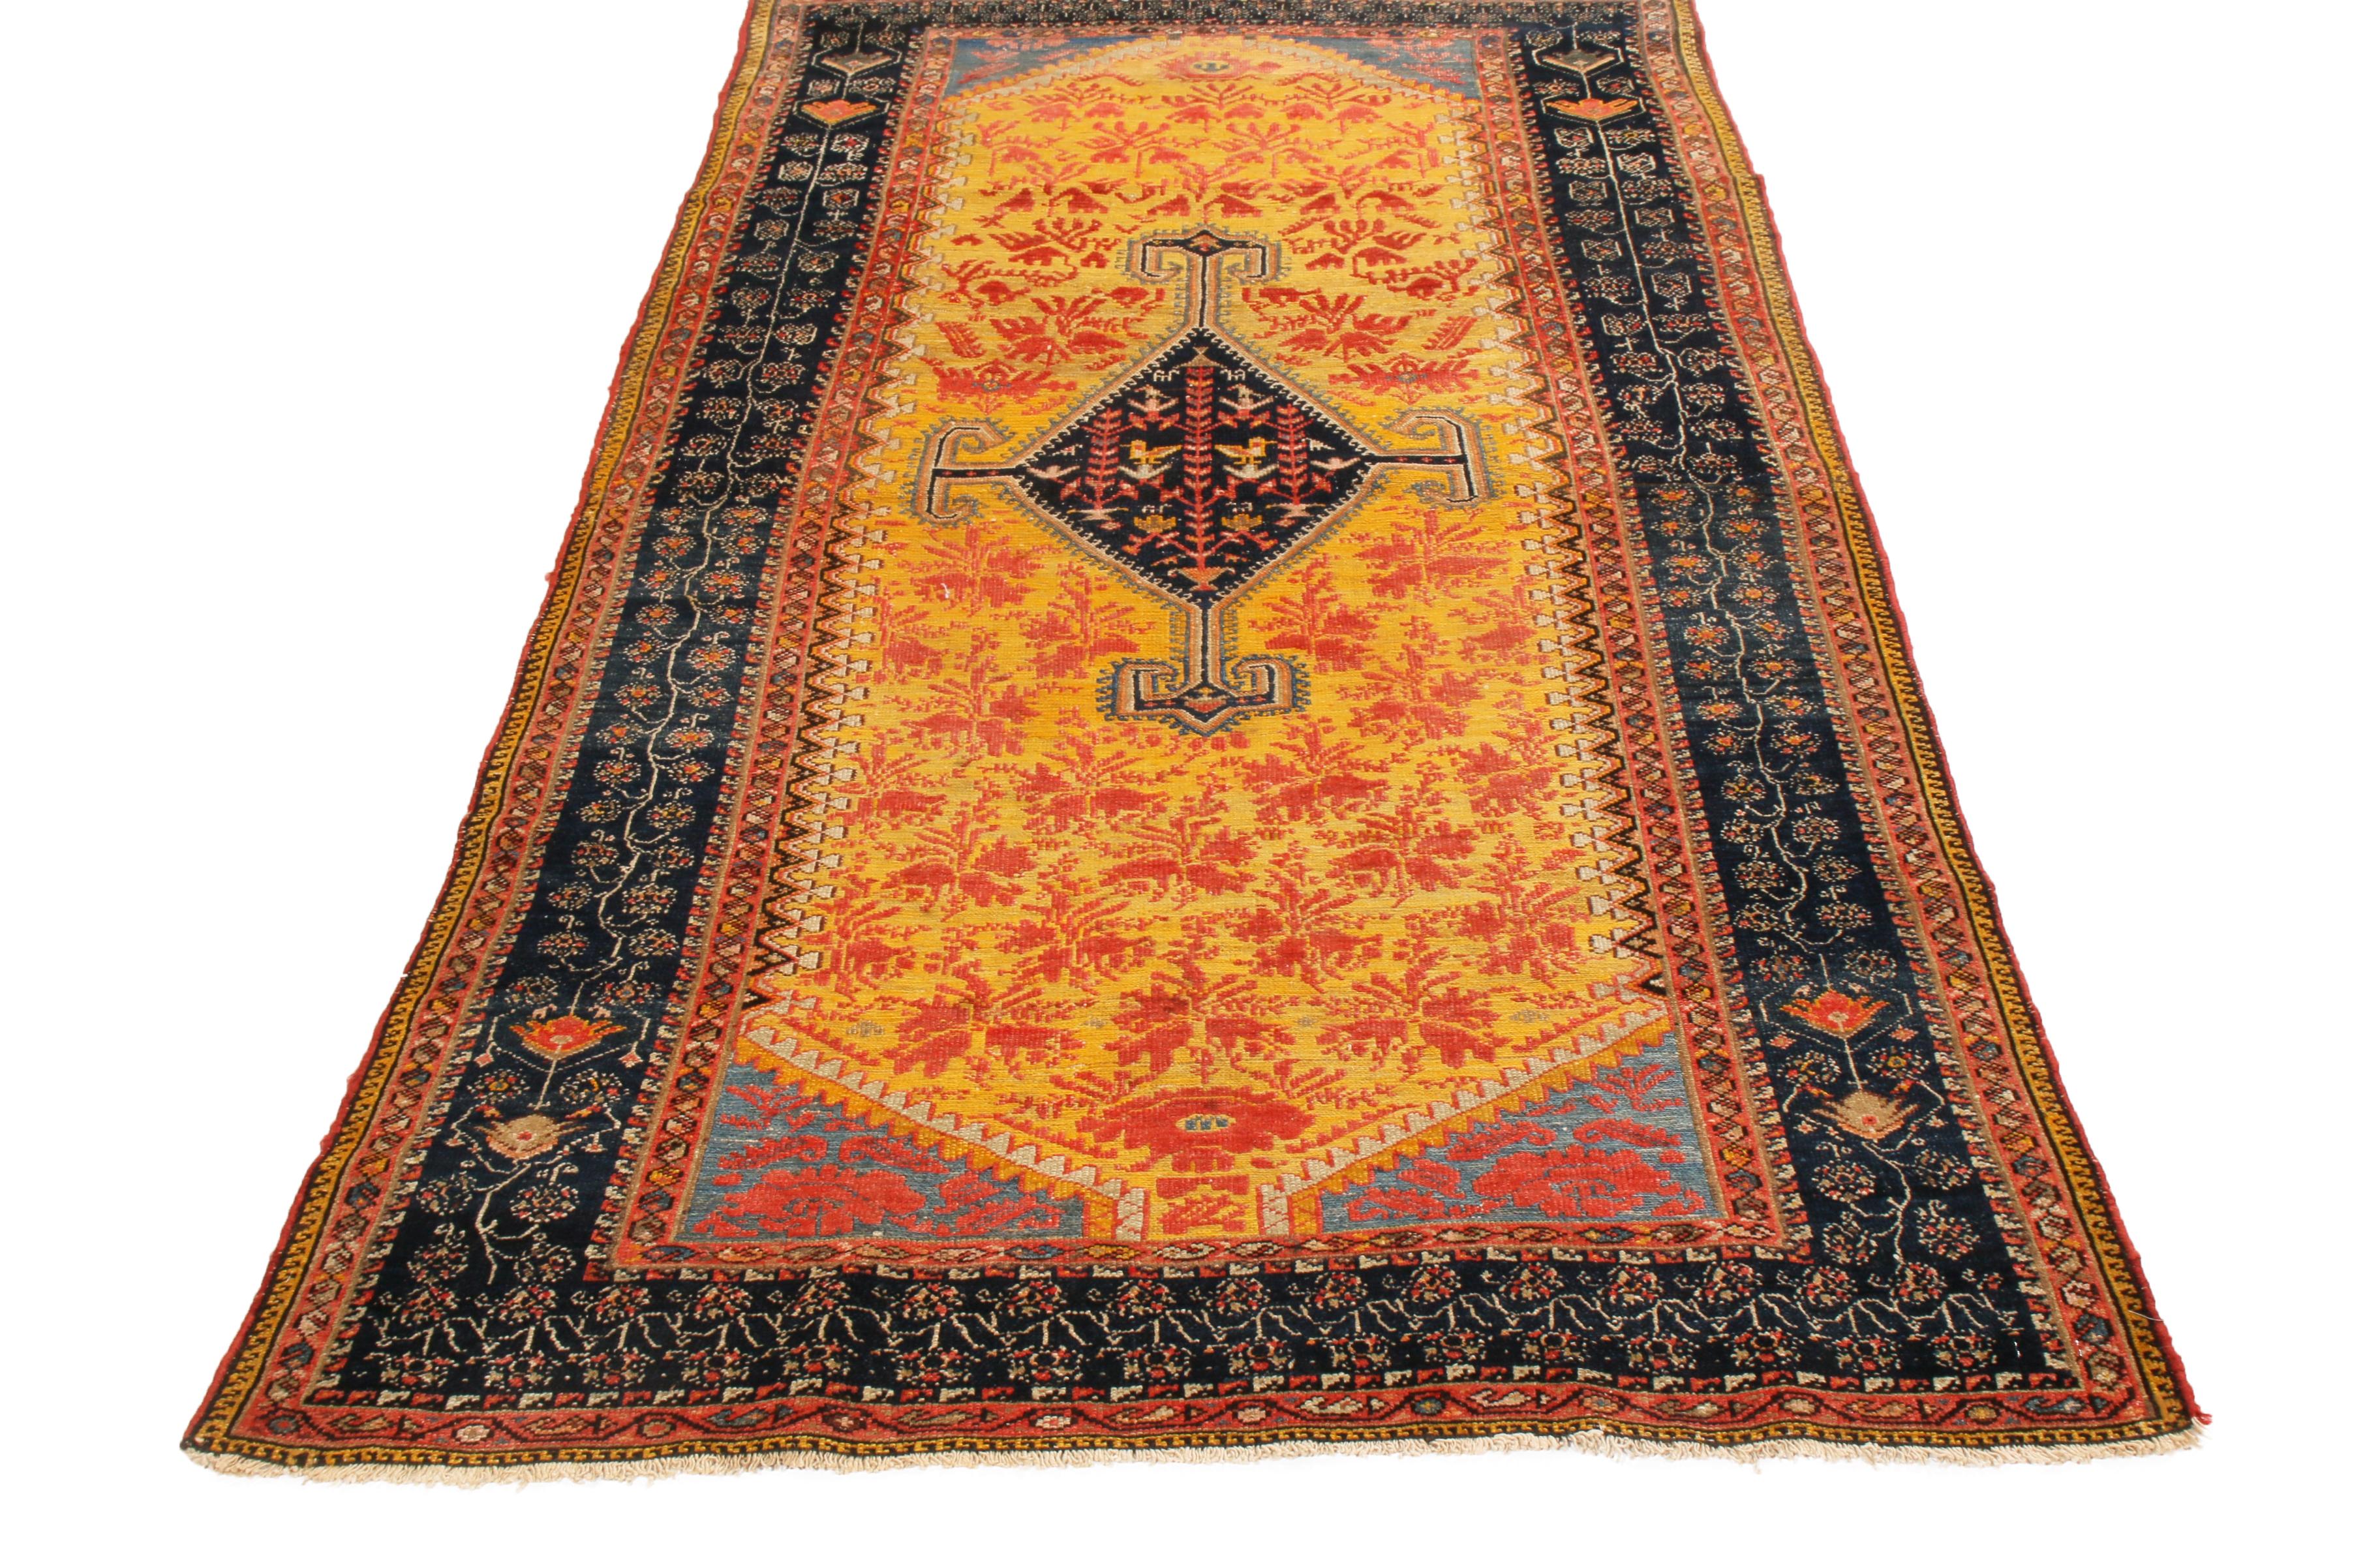 Originating from Persia in 1890, this antique traditional Hamadan Persian rug features a stylistically intriguing variation of the tree of life motif. A once iconic symbol of eternal life often used in rituals and commemorations, this piece’s fig